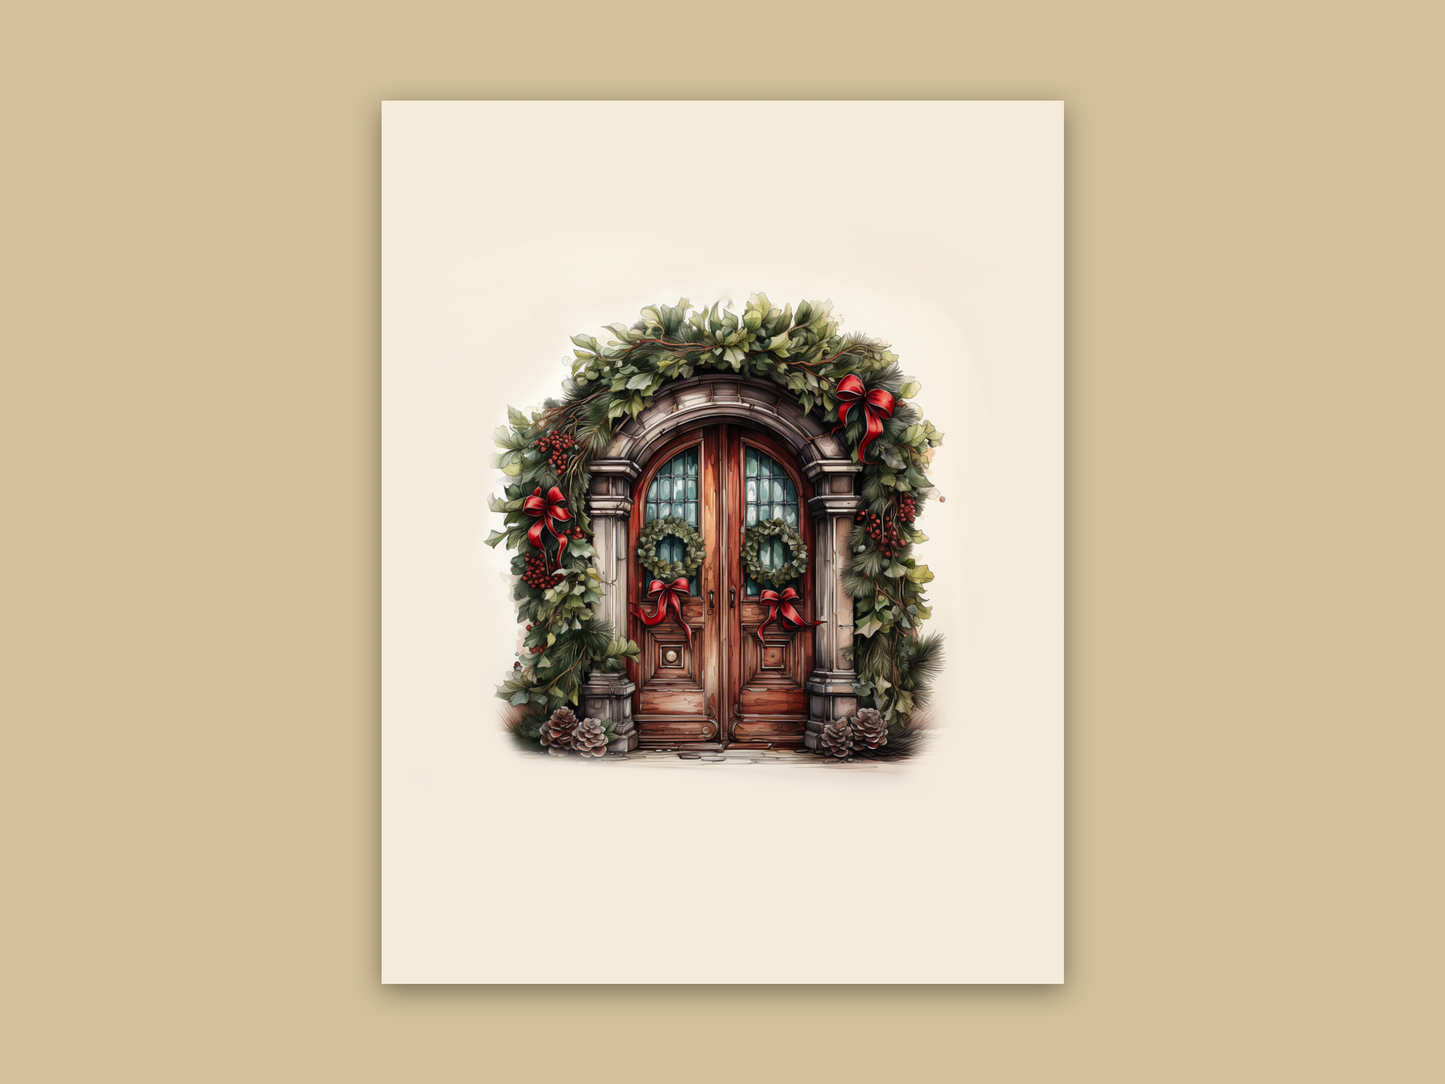 Whimsical Christmas boxed cards pack